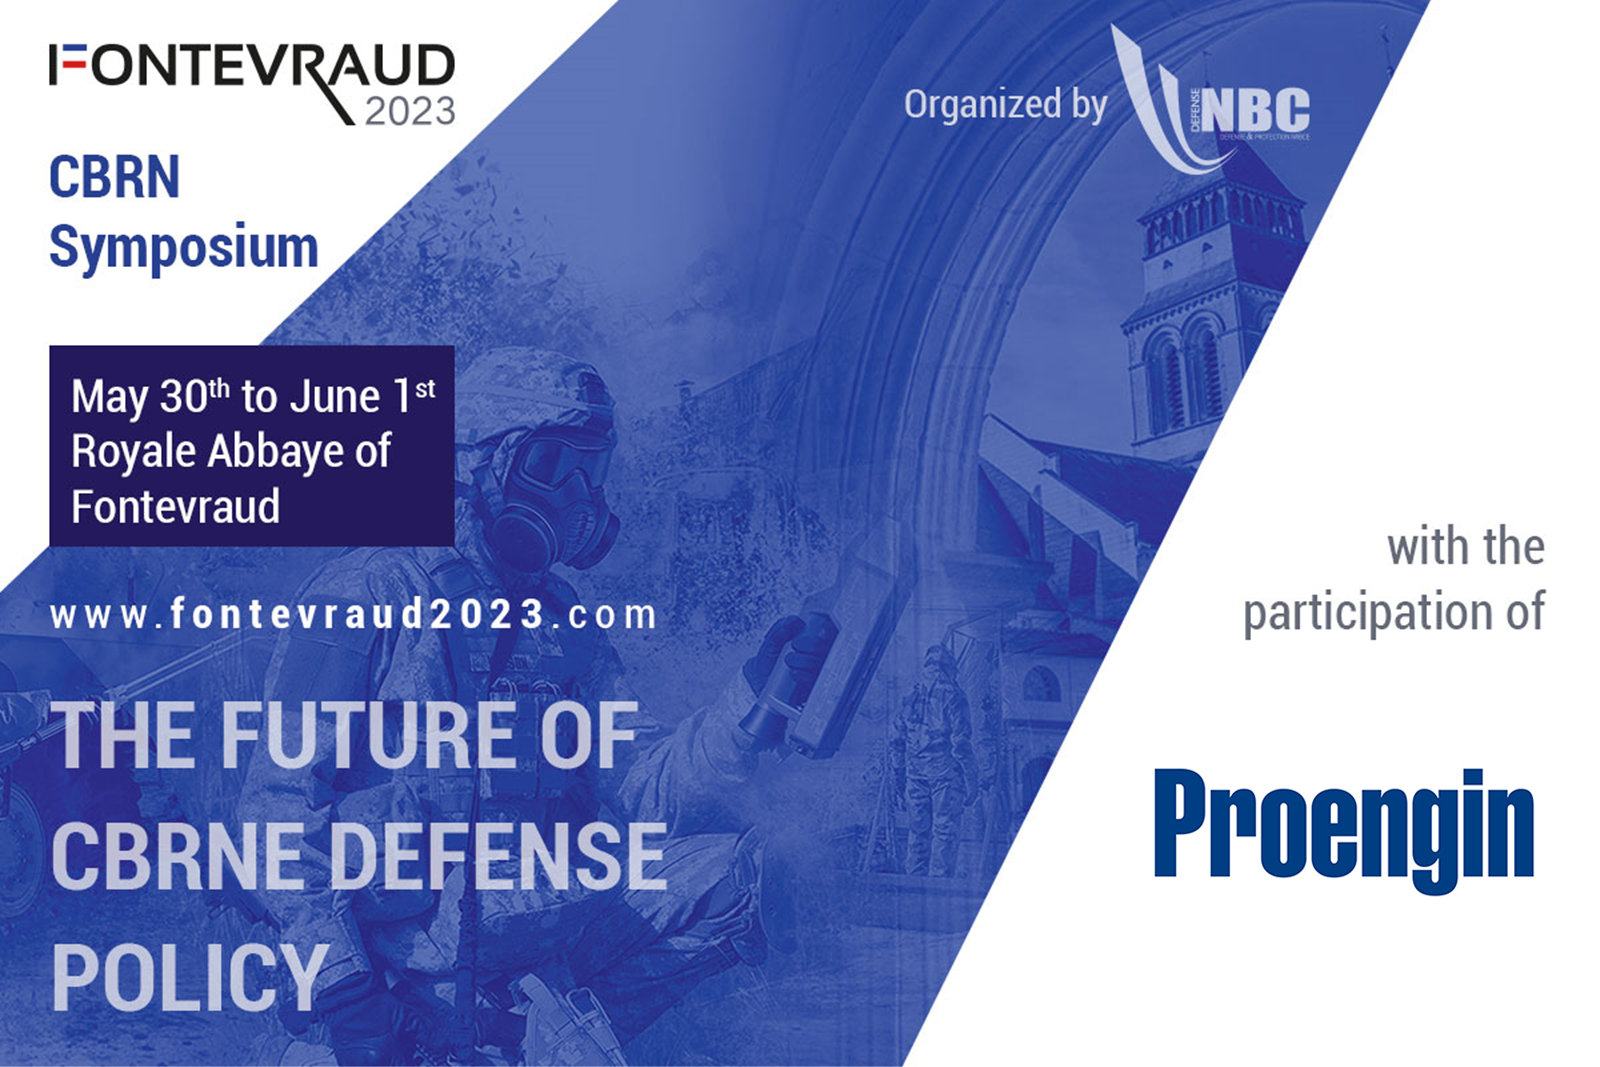 Proengin – Pioneering the Future of CBRN Detection at Fontevraud2023 Symposium NRBCe.